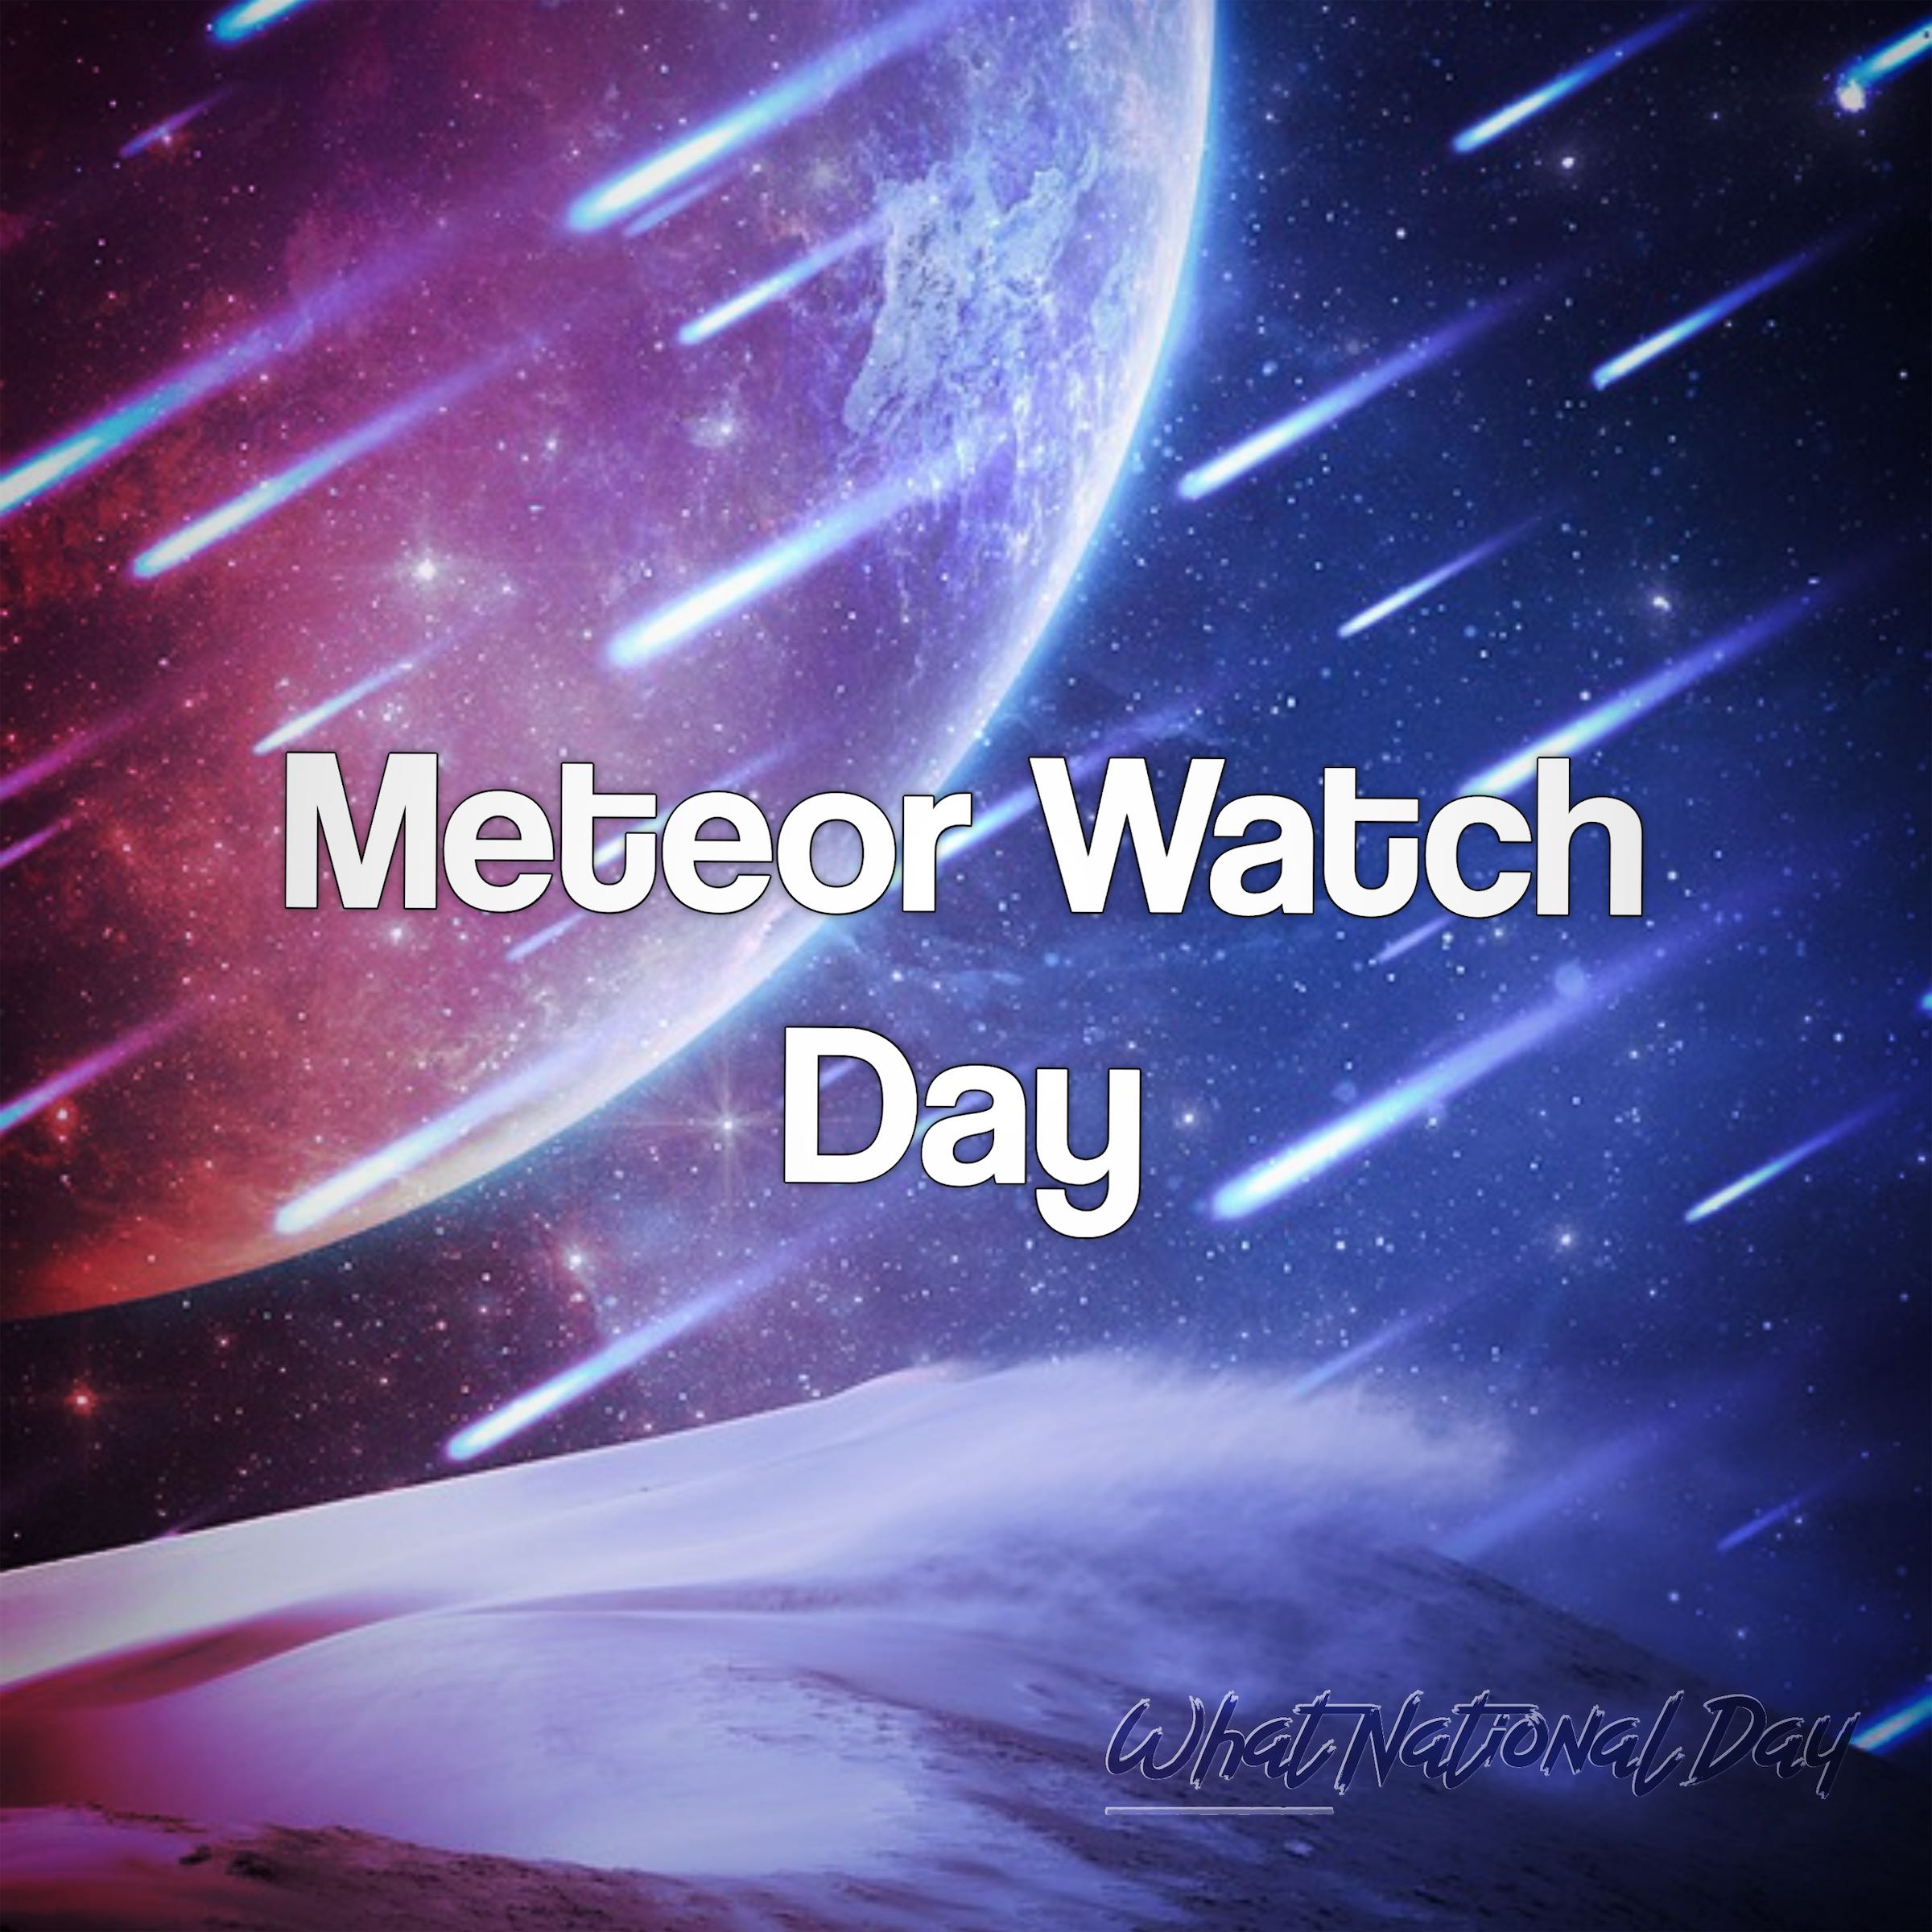 Meteor Watch Day